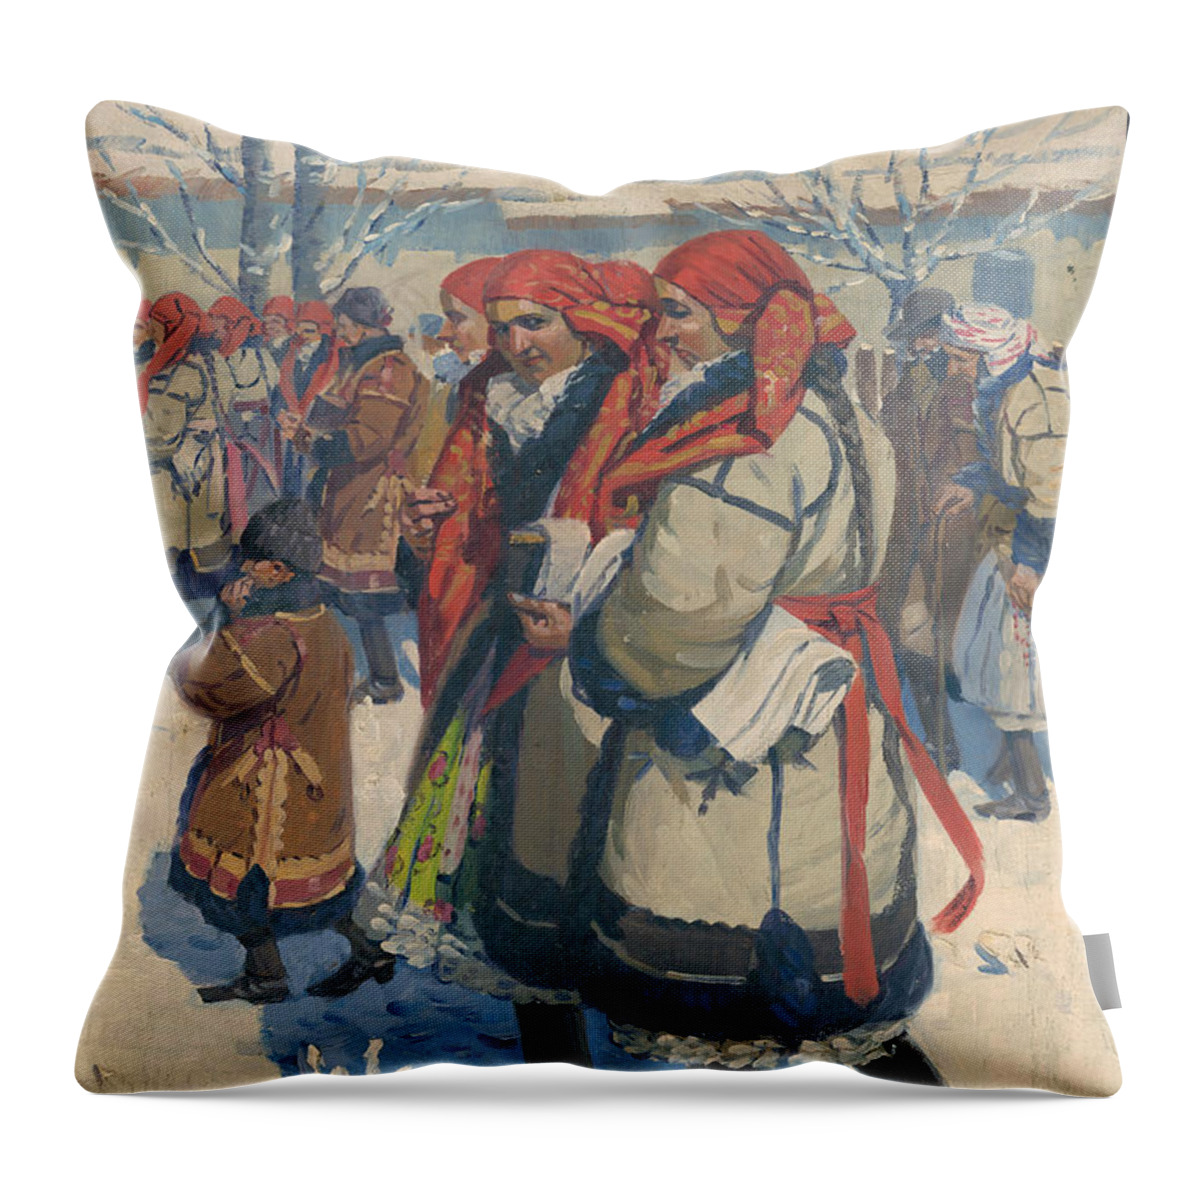 Moravian Slovaks In The Winter Throw Pillow featuring the painting Moravian Slovaks in the winter by Antos Frolka